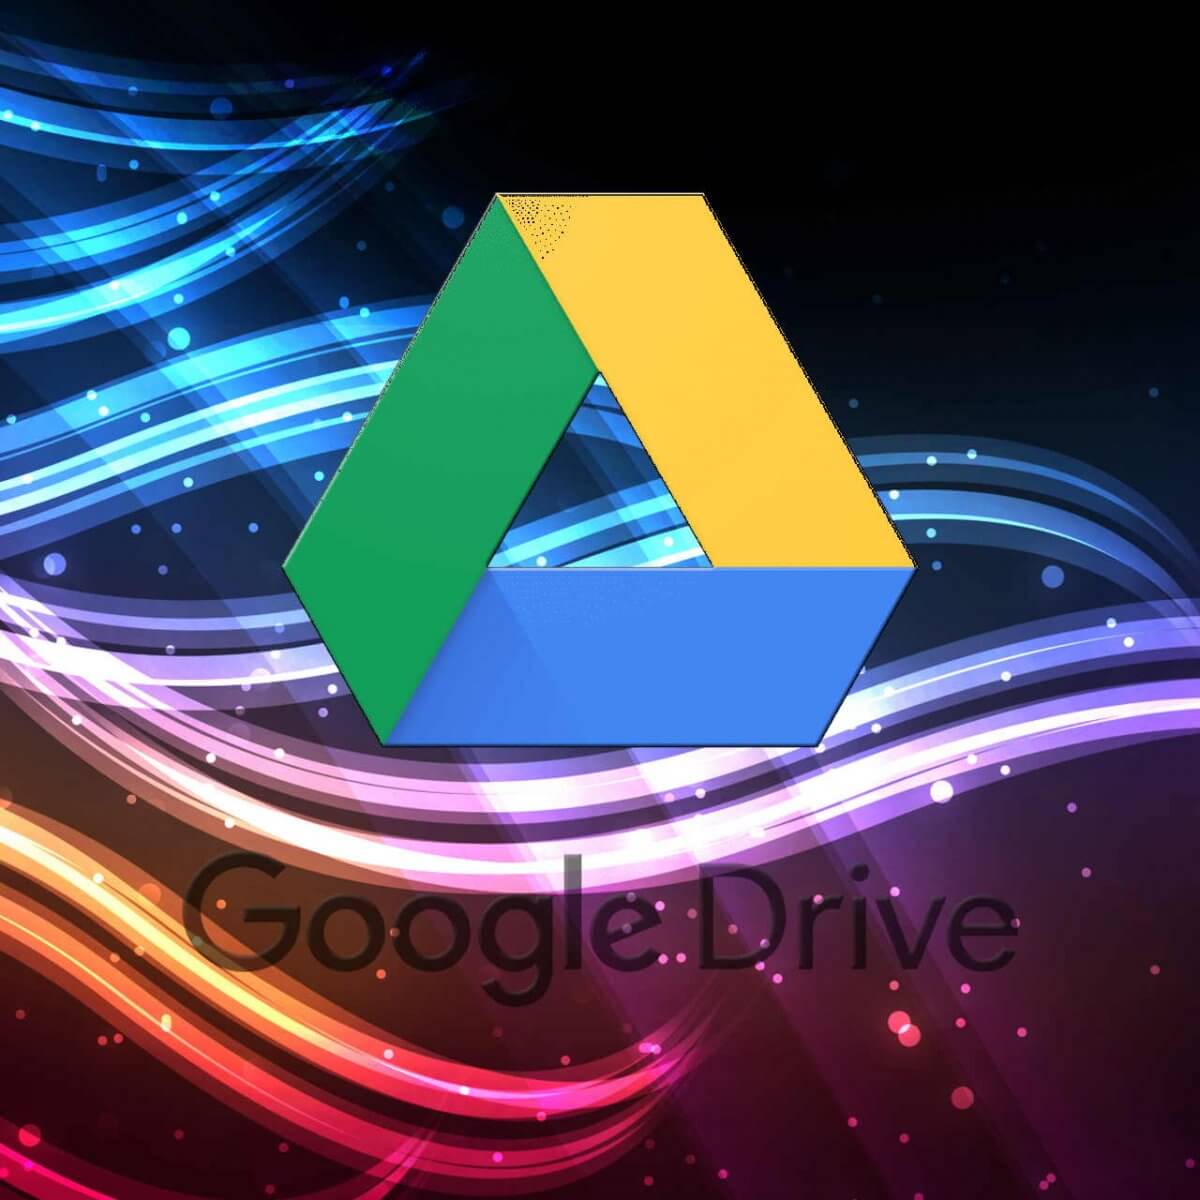 why i cant from google drive